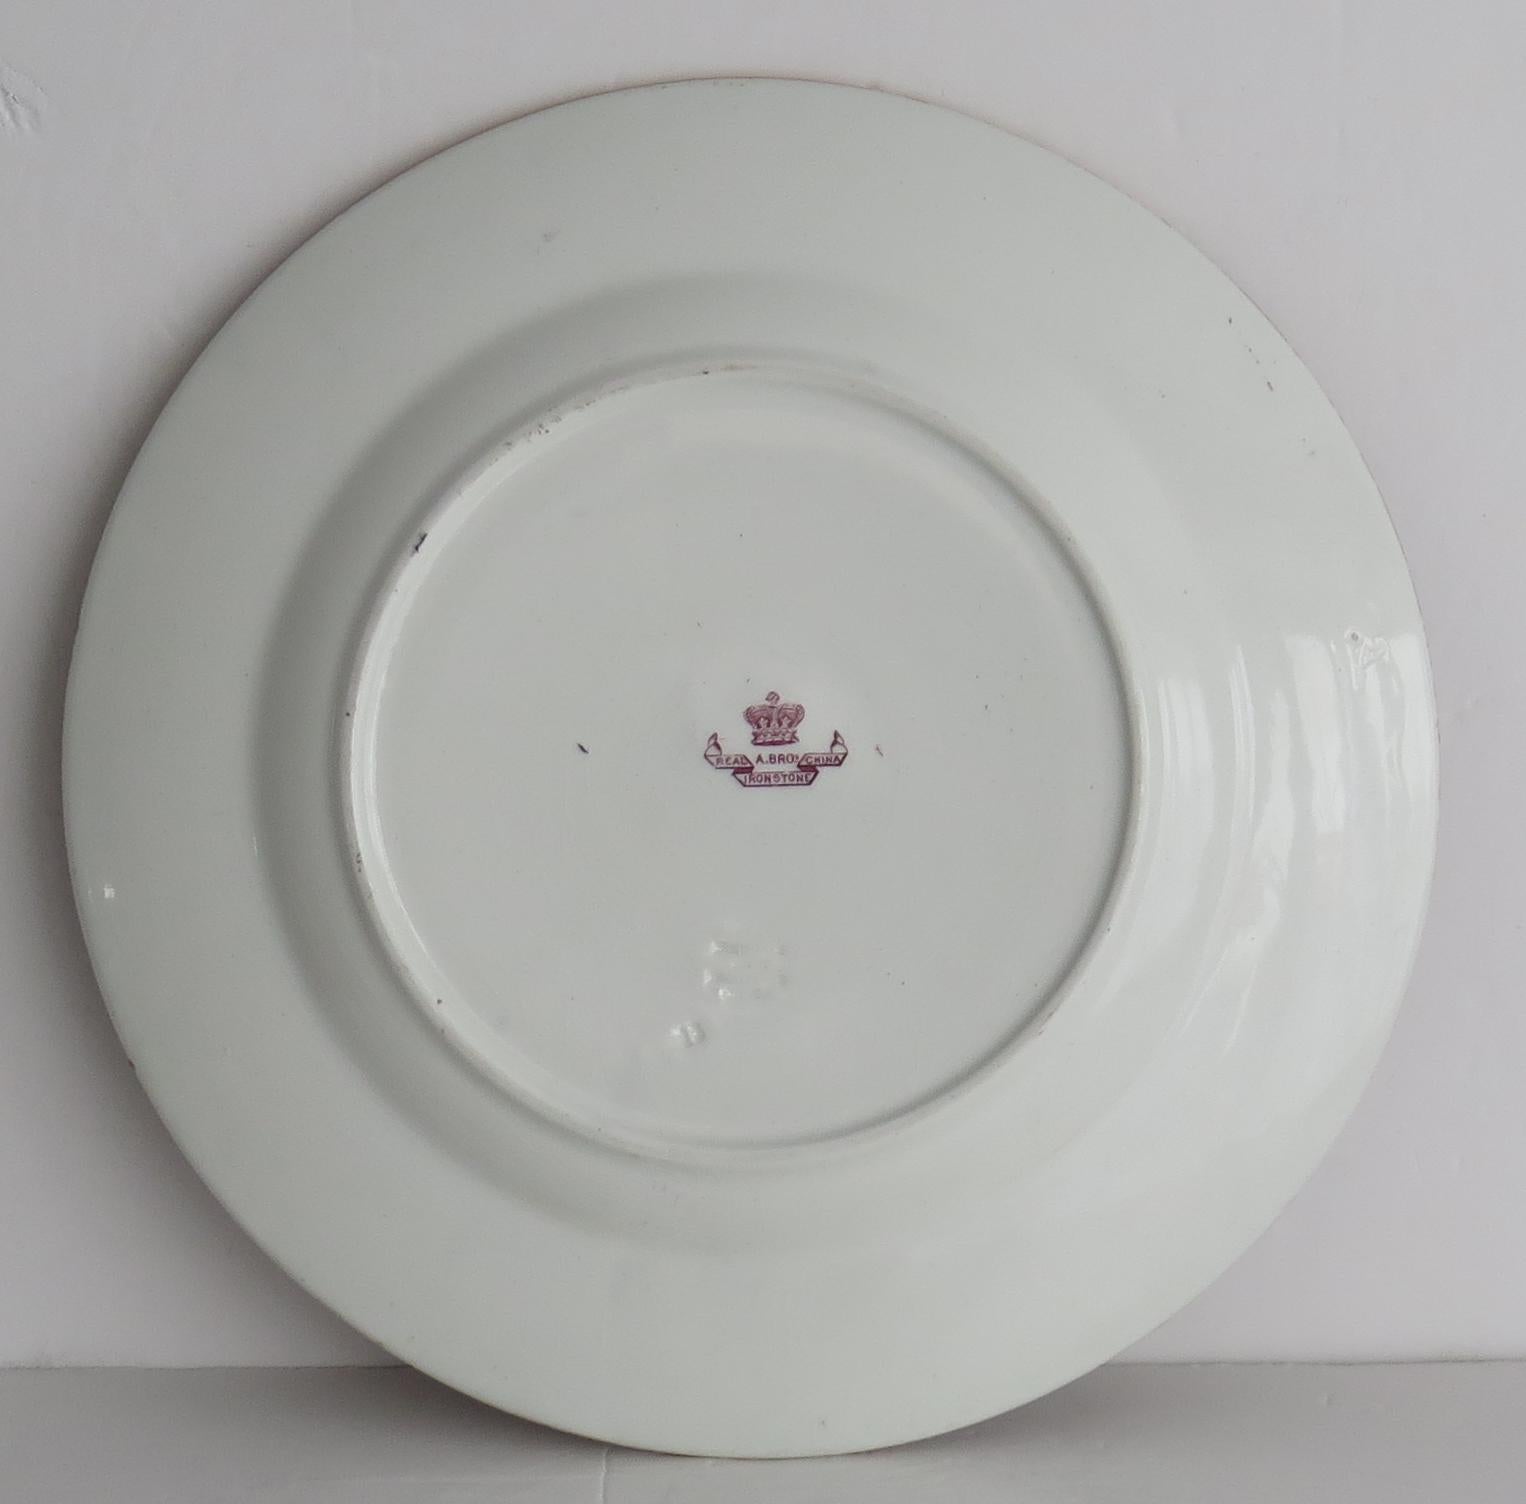 Mason's Ashworth's Ironstone Dinner Plate in Coloured Wall Pattern, circa 1870 For Sale 3